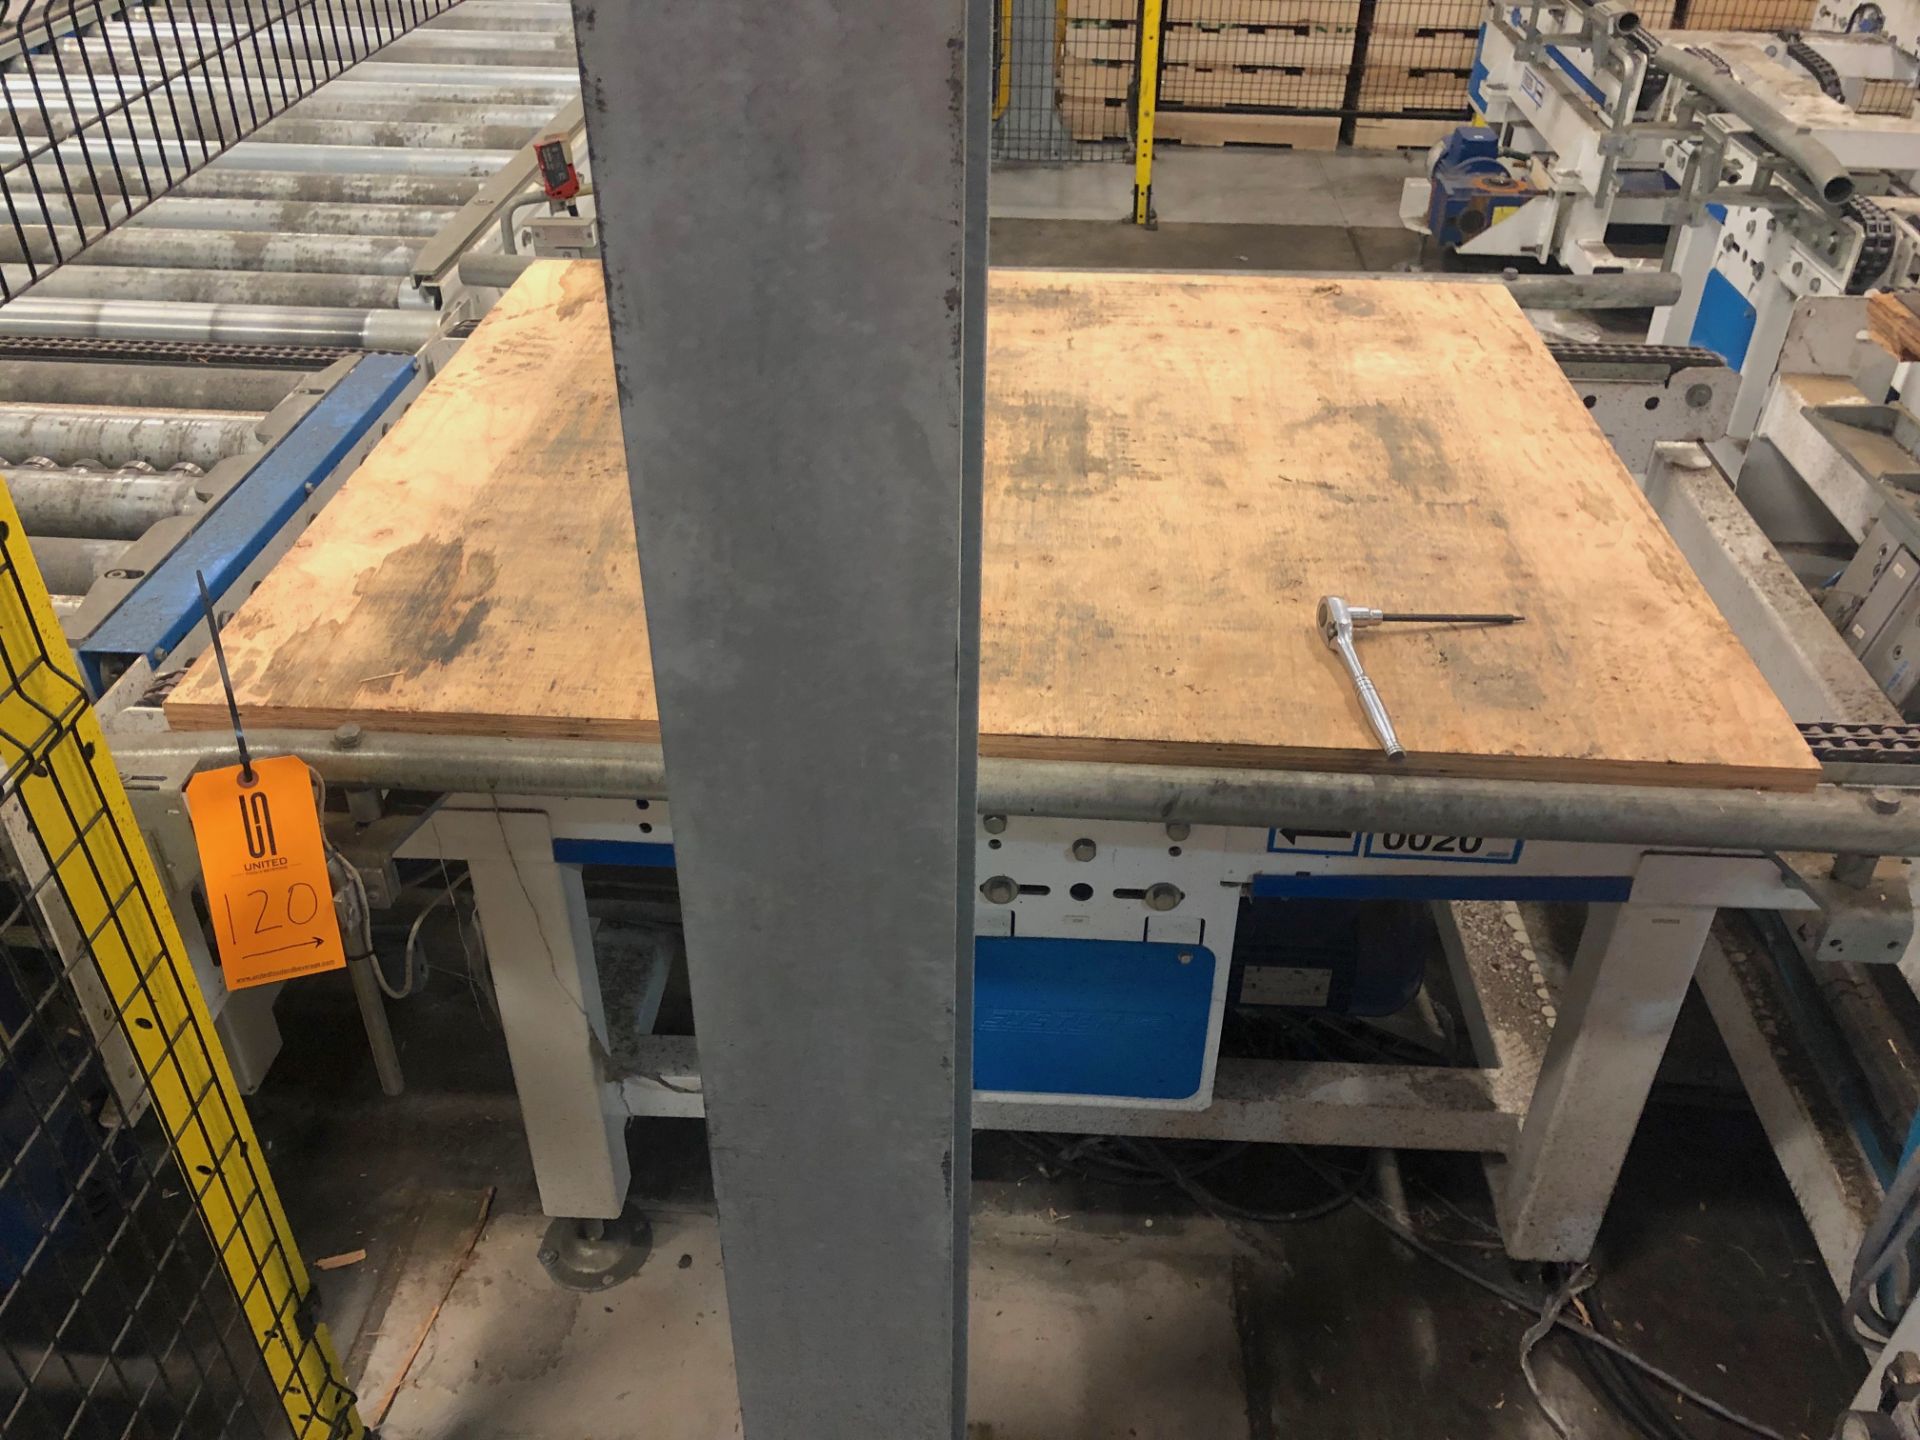 Pallet Dispenser Loading Area (to Feed Pallets to Robotic Palletizers) - Image 17 of 17